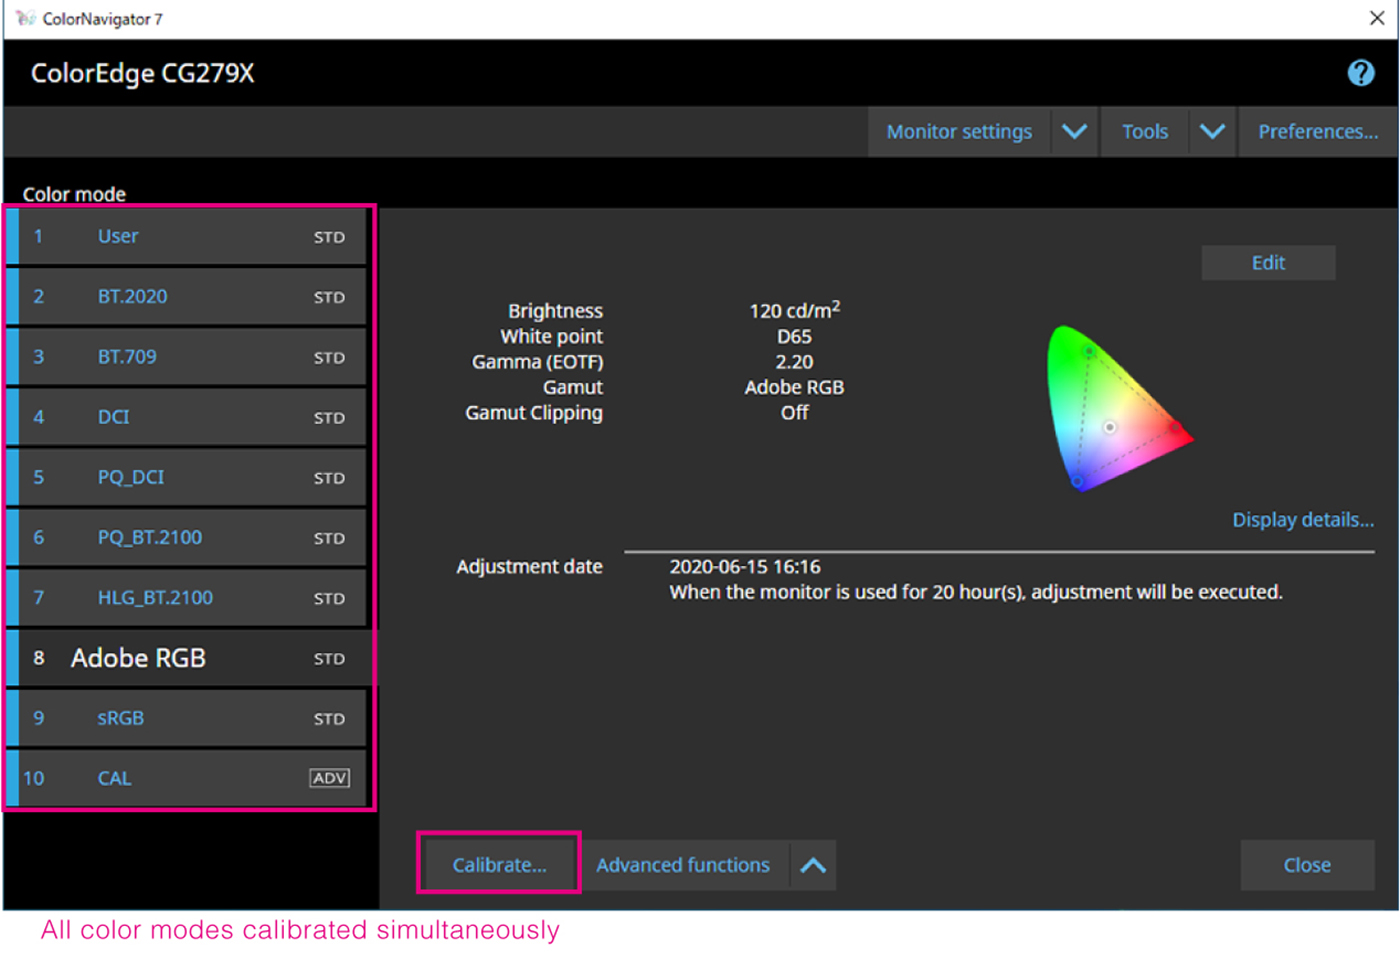 Calibrate All Color Modes at Once